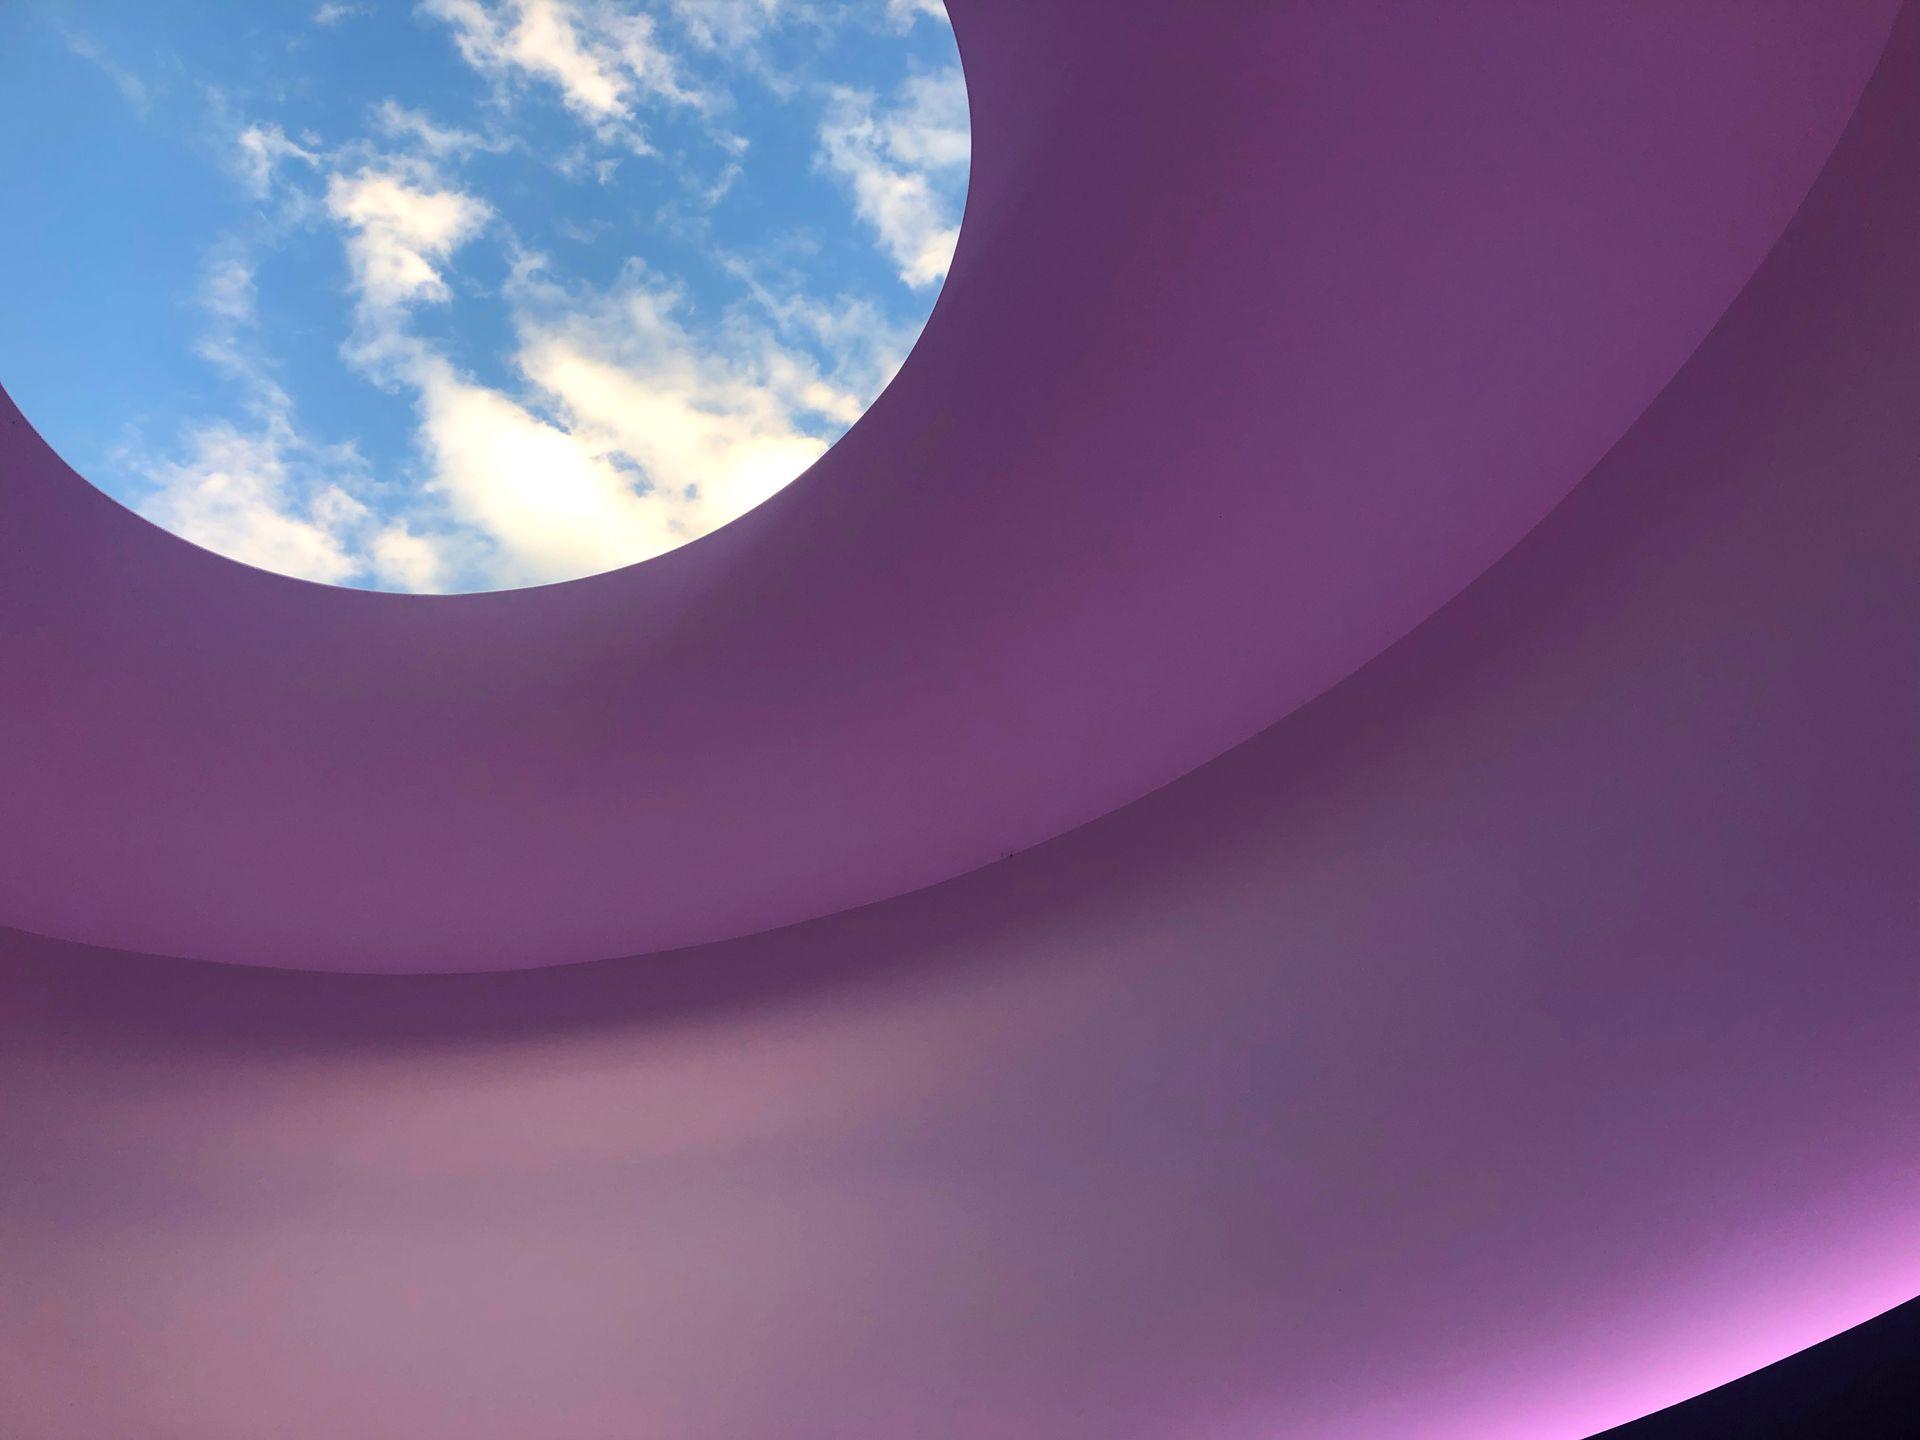 An art installation with purple light and an opening that shows view of the sky